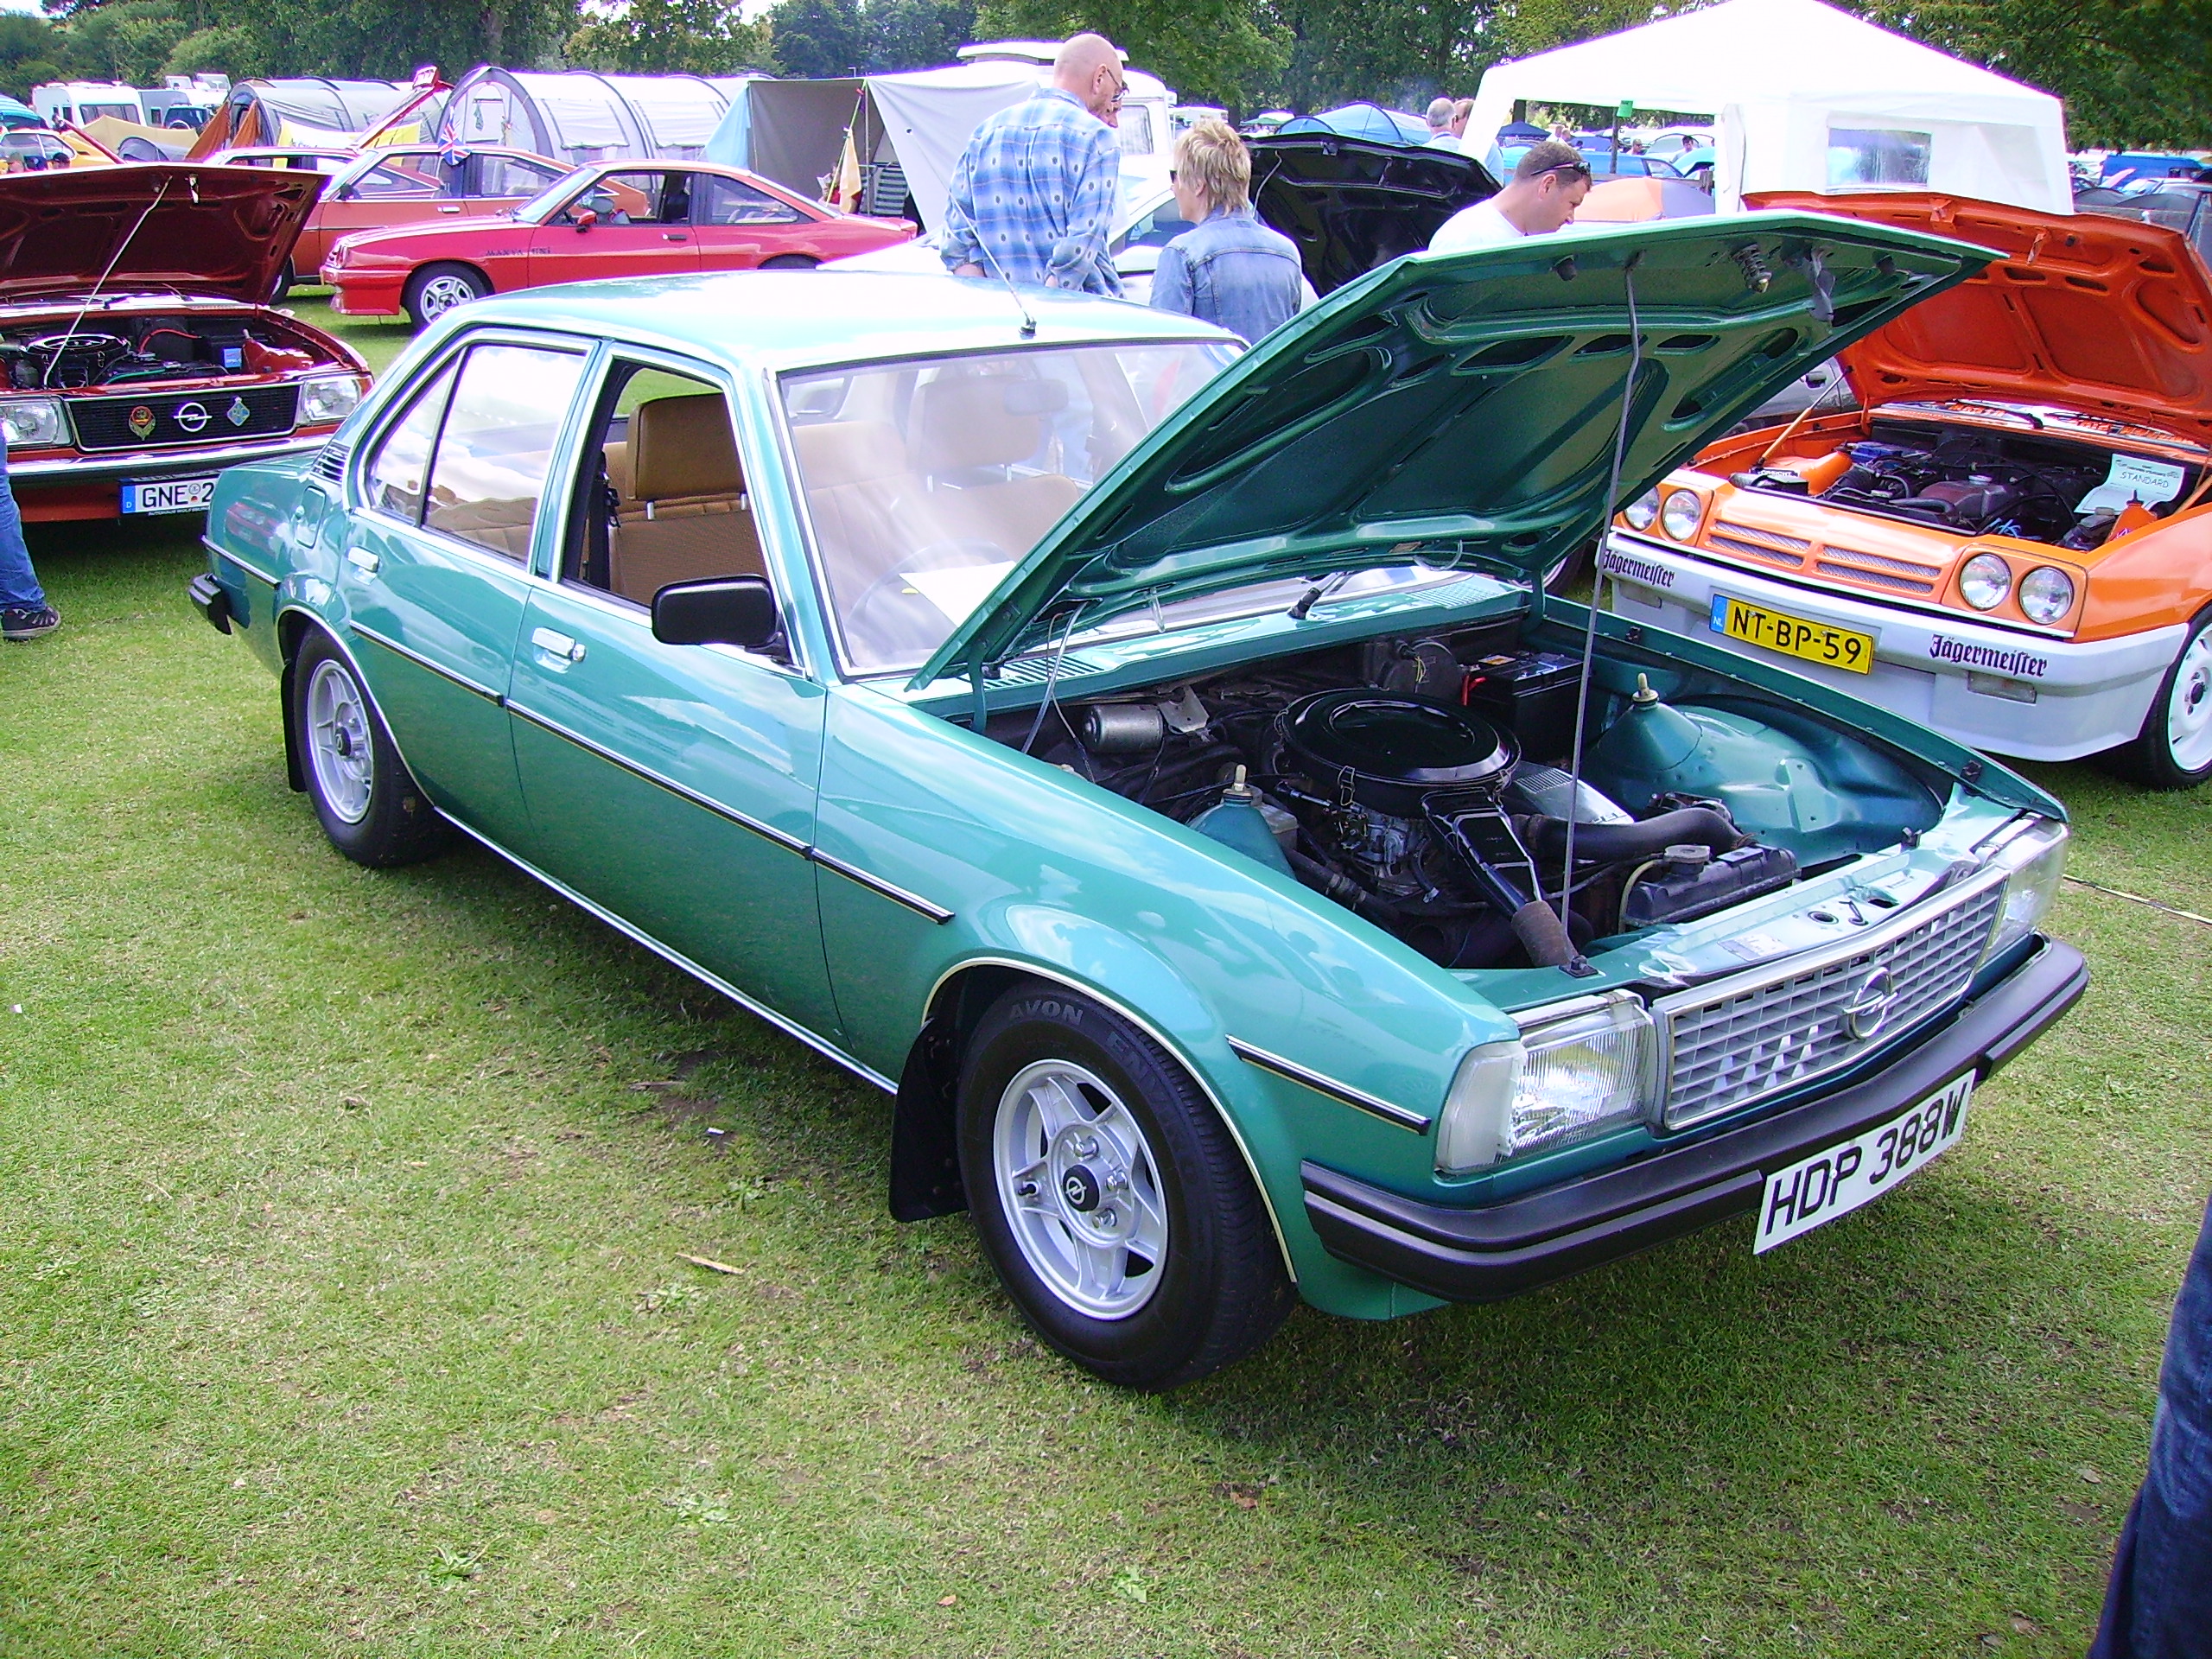 The second generation Opel Ascona B was presented in the 1975 Frankfurt